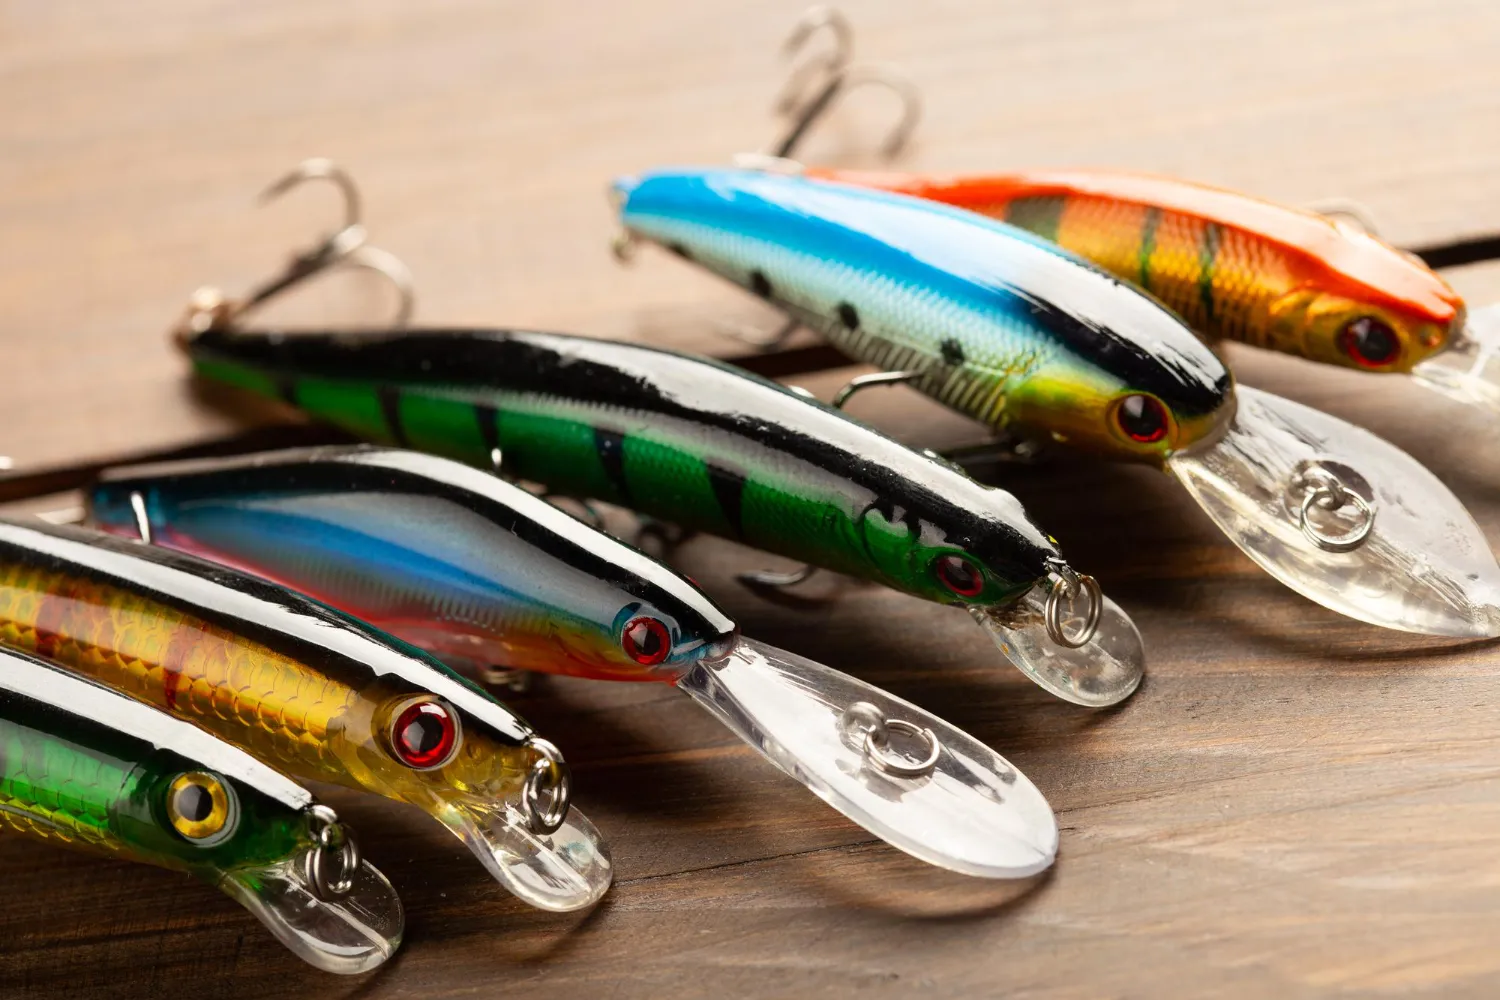 Best Baits for Ice Fishing: Lures and Live Bait Options